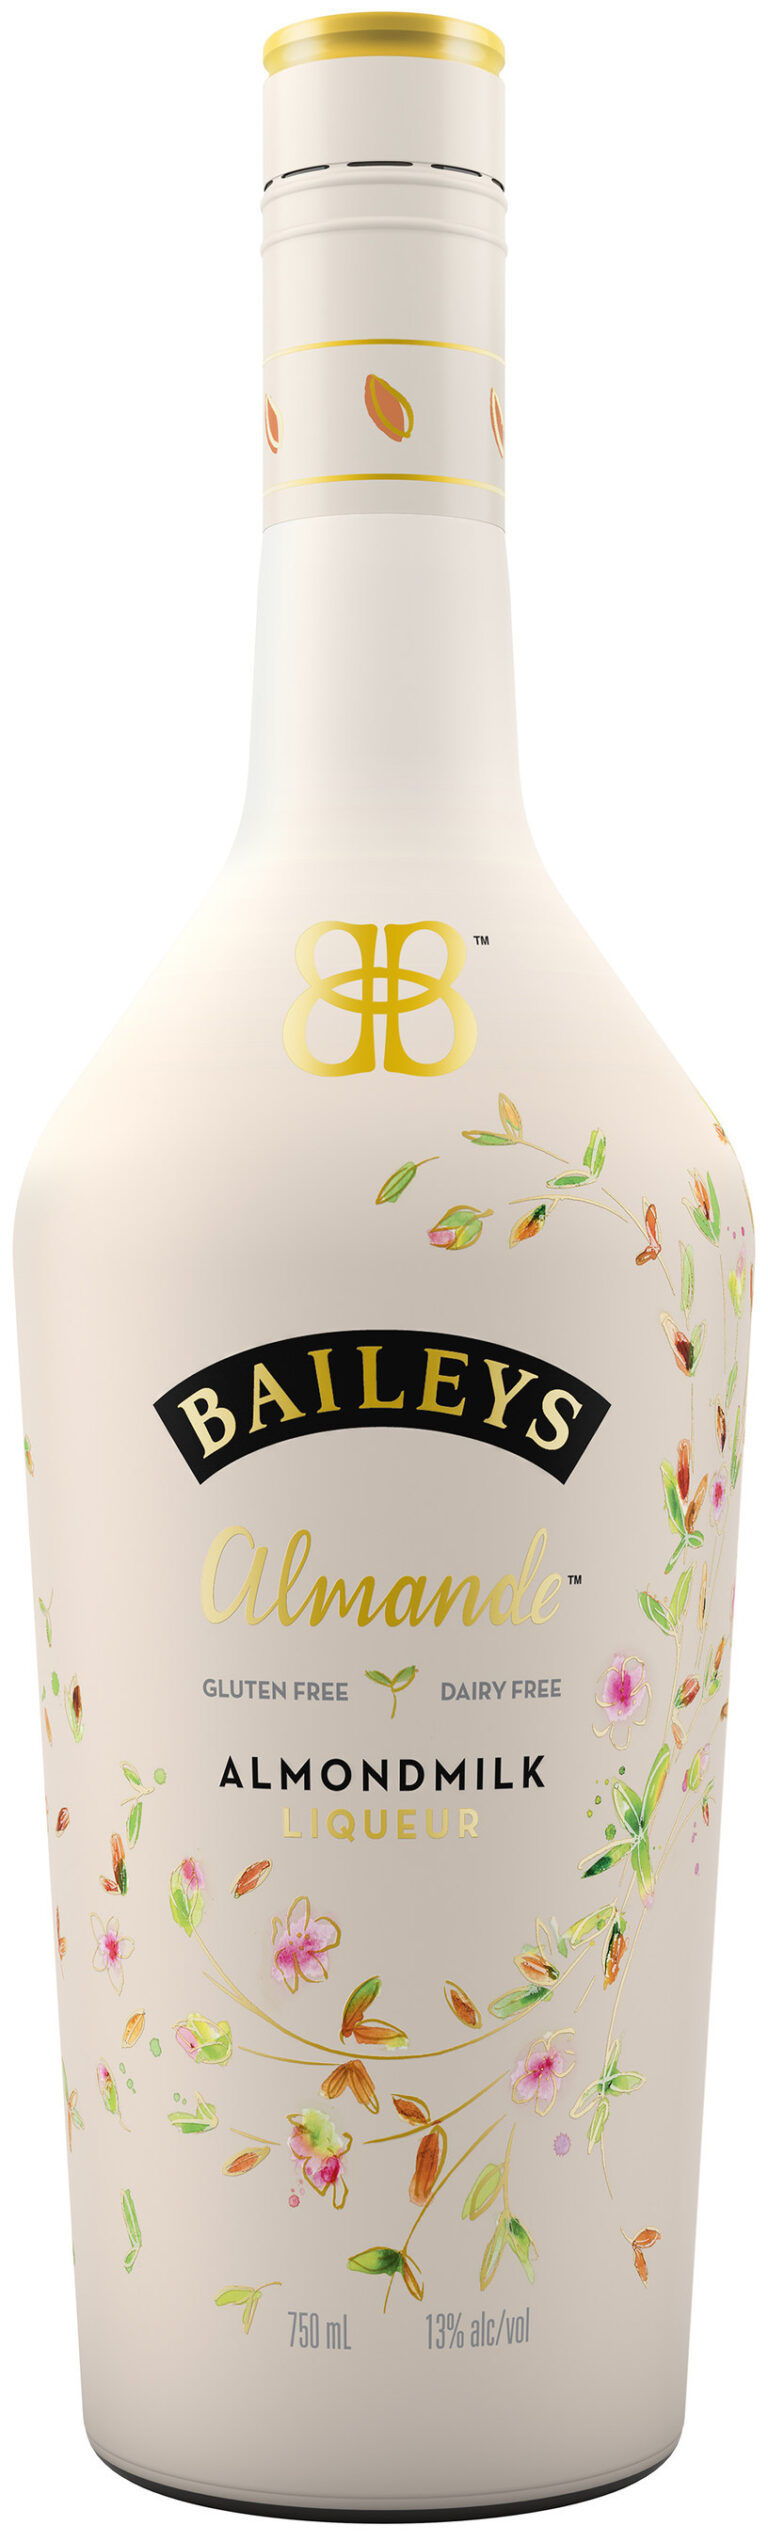 Does Baileys Almande Need to Be Refrigerated